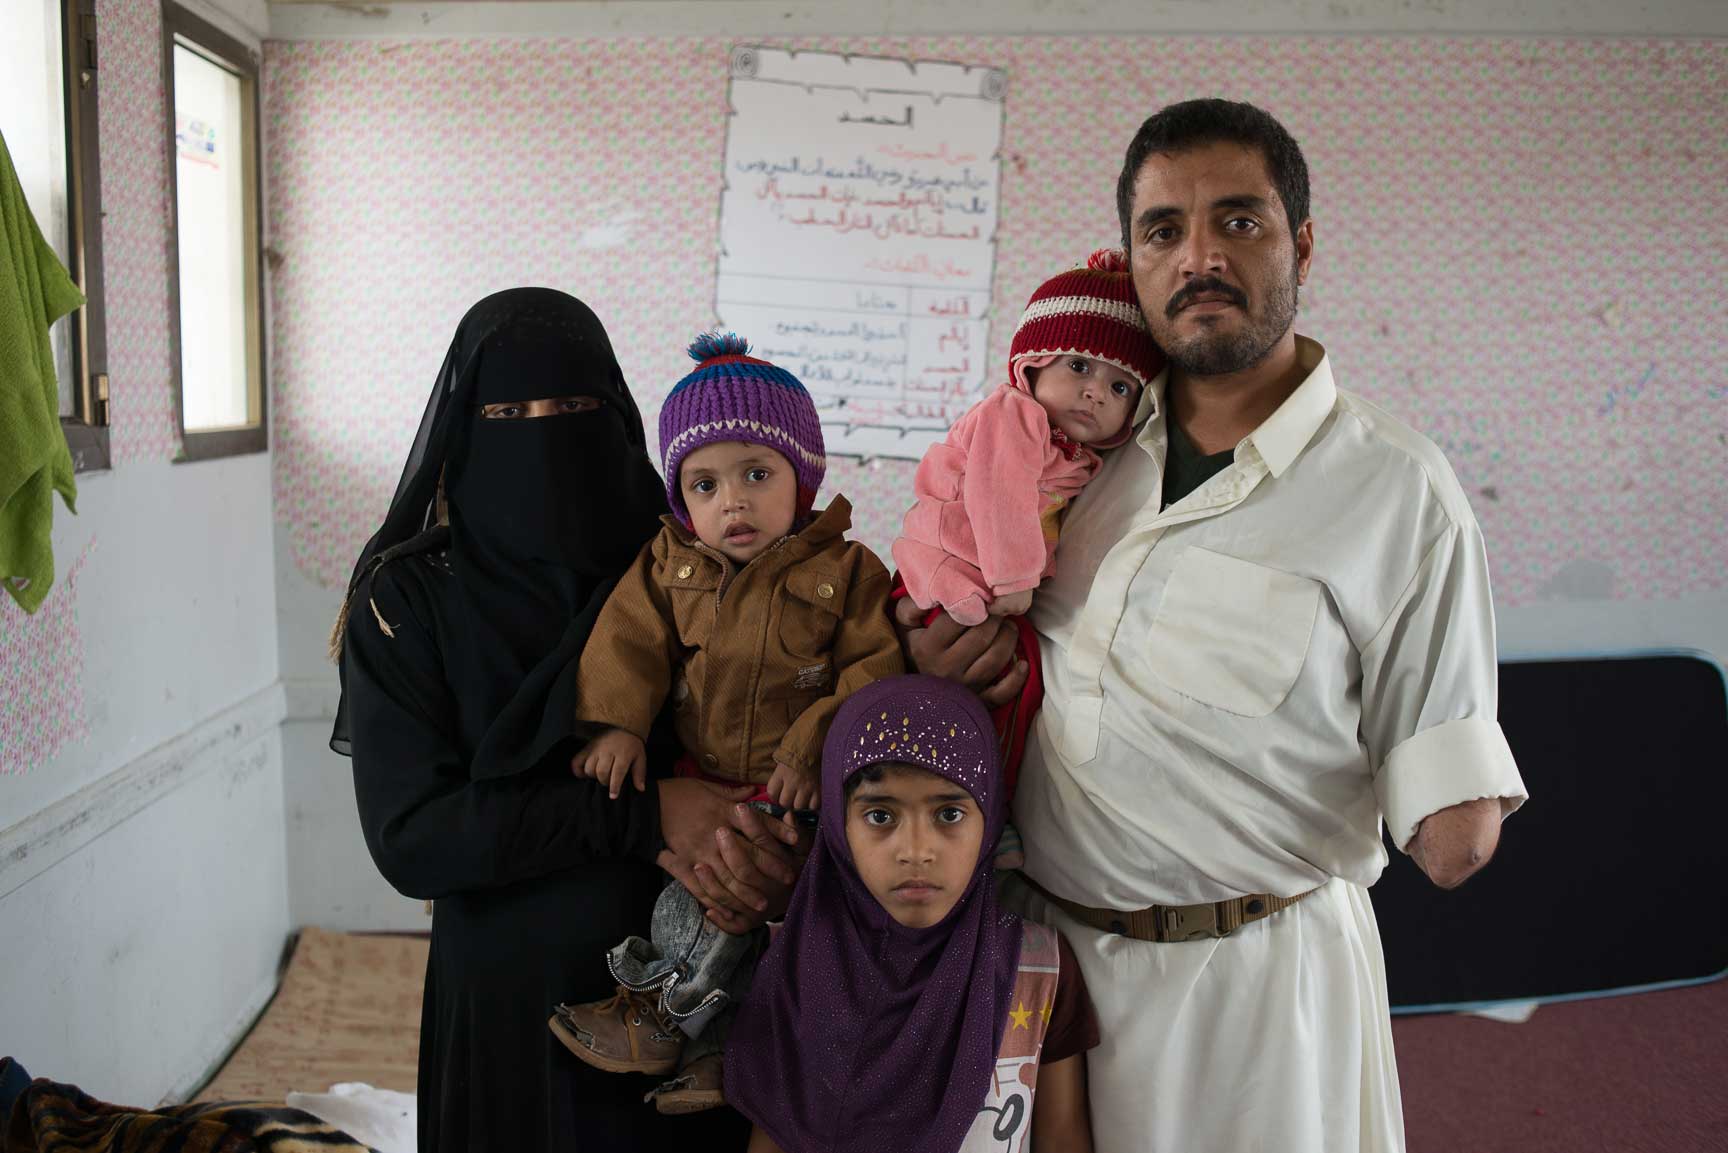 Mohammad Abdulrab Qahed, originally from the Razih district of Sa'ada, bordering Saudi Arabia, stands with his wife Umm Sa'ad, and three children, Imad, Wiam, and Dua'a, on June 10, 2015 in Sana'a, Yemen. Now living in a school with other IDP's, they are some of the 1.5 million Yemenis displaced from their homes across the country.